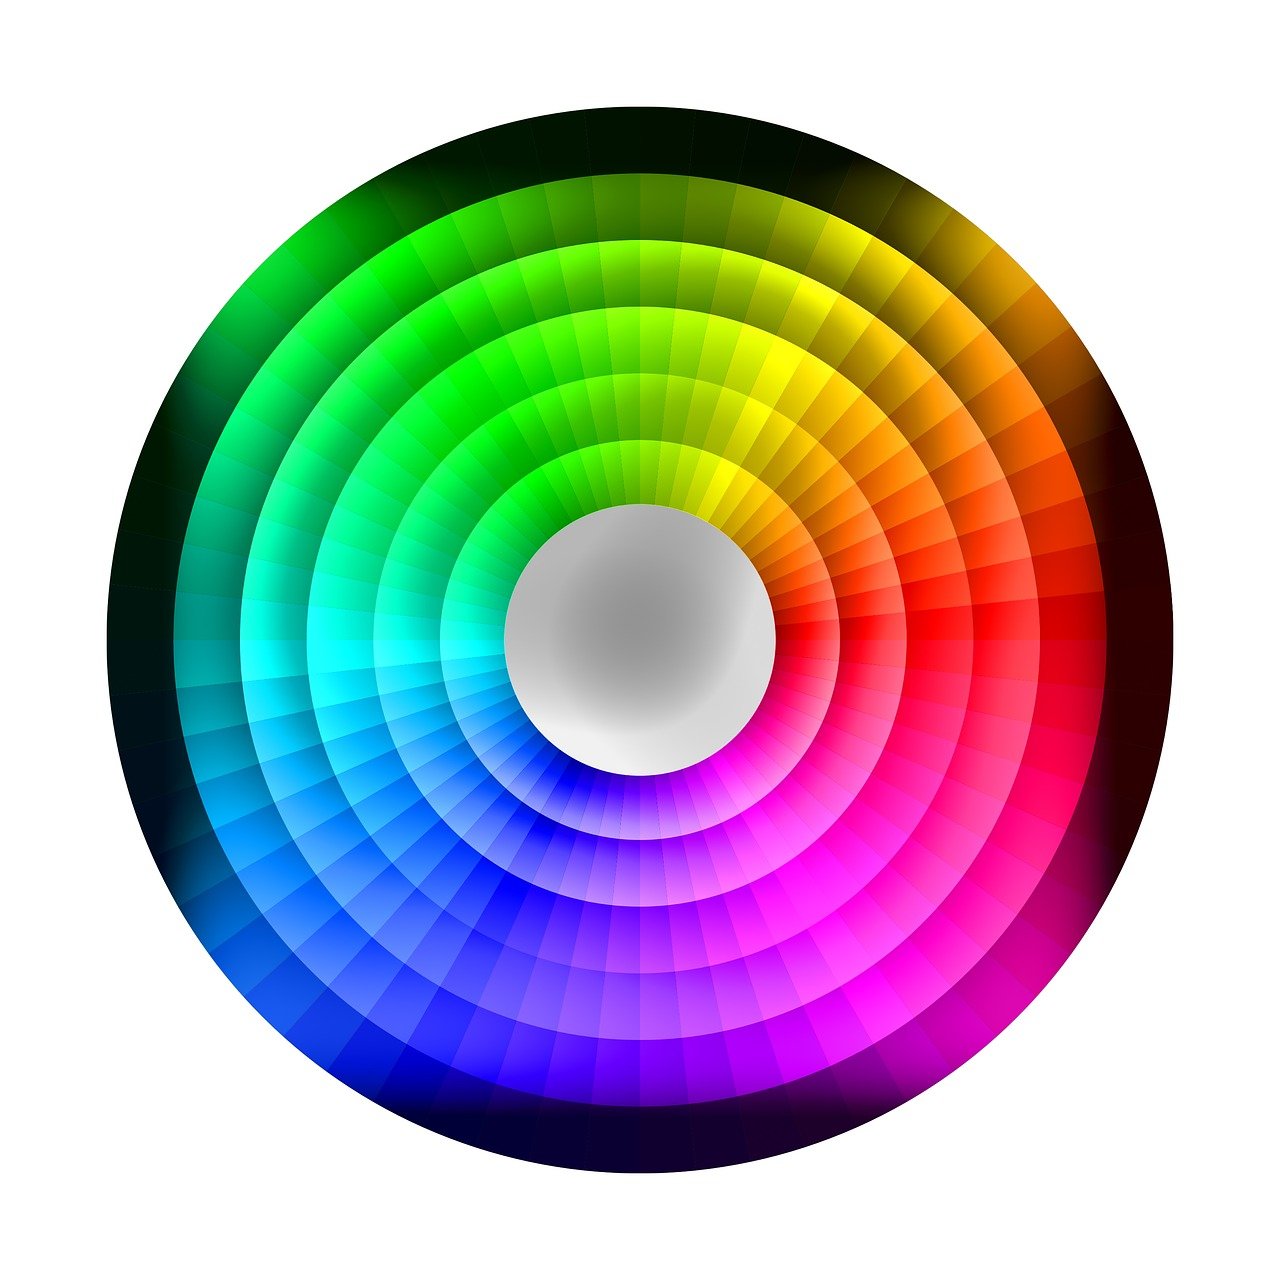 an image of a color wheel on a white background, a digital rendering, led color, colorful palette illustration